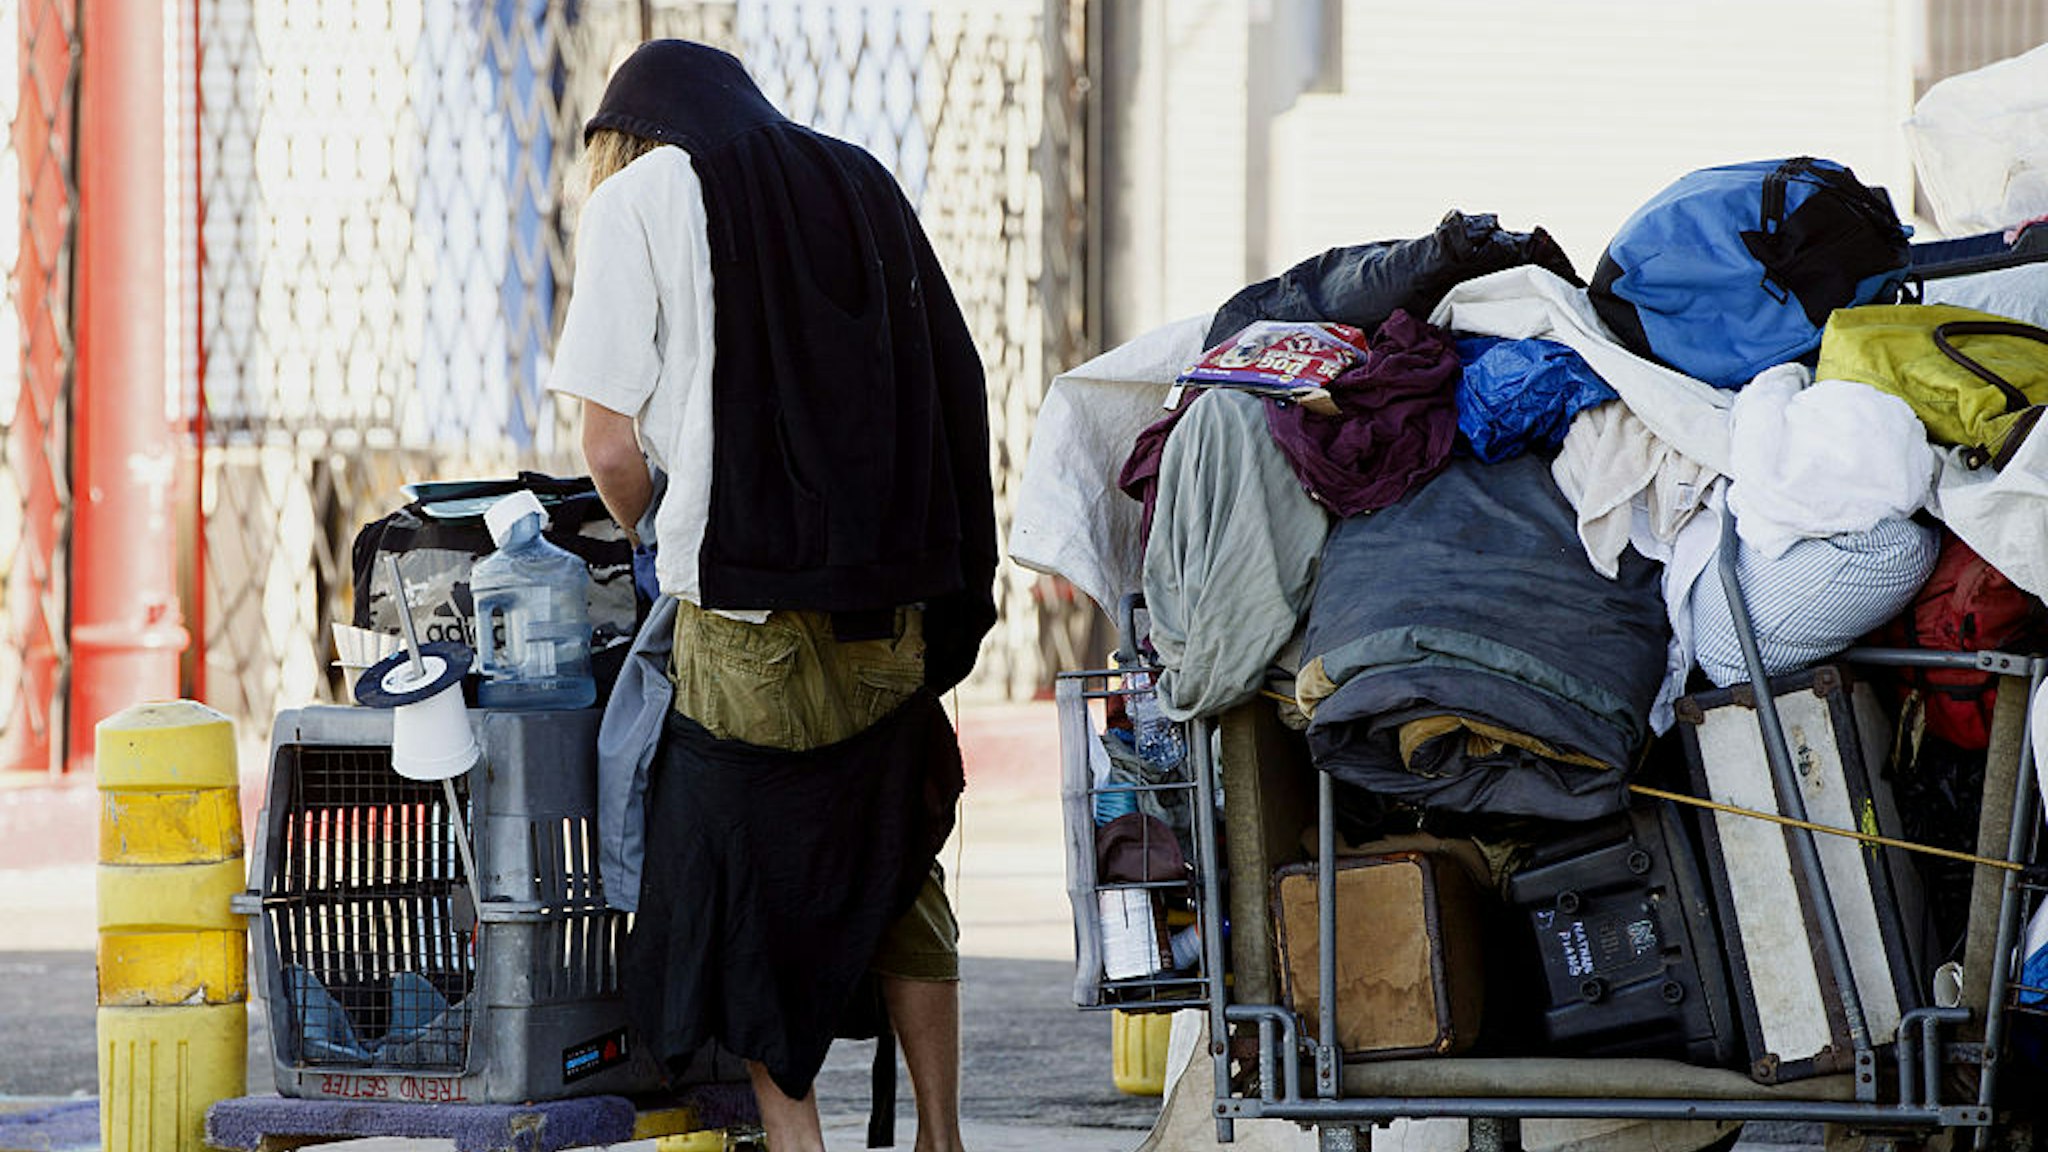 A man pushes a cart on the Venice Beach boardwalk in Los Angeles, California, U.S., on Friday, Oct. 9, 2015. Homelessness is on the rise in many of America's biggest cities as wealth concentrates in urban centers, elevating rents and squeezing supplies of affordable housing in places like Los Angeles and New York, new federal data shows. Photographer: Patrick T. Fallon/Bloomberg via Getty Images